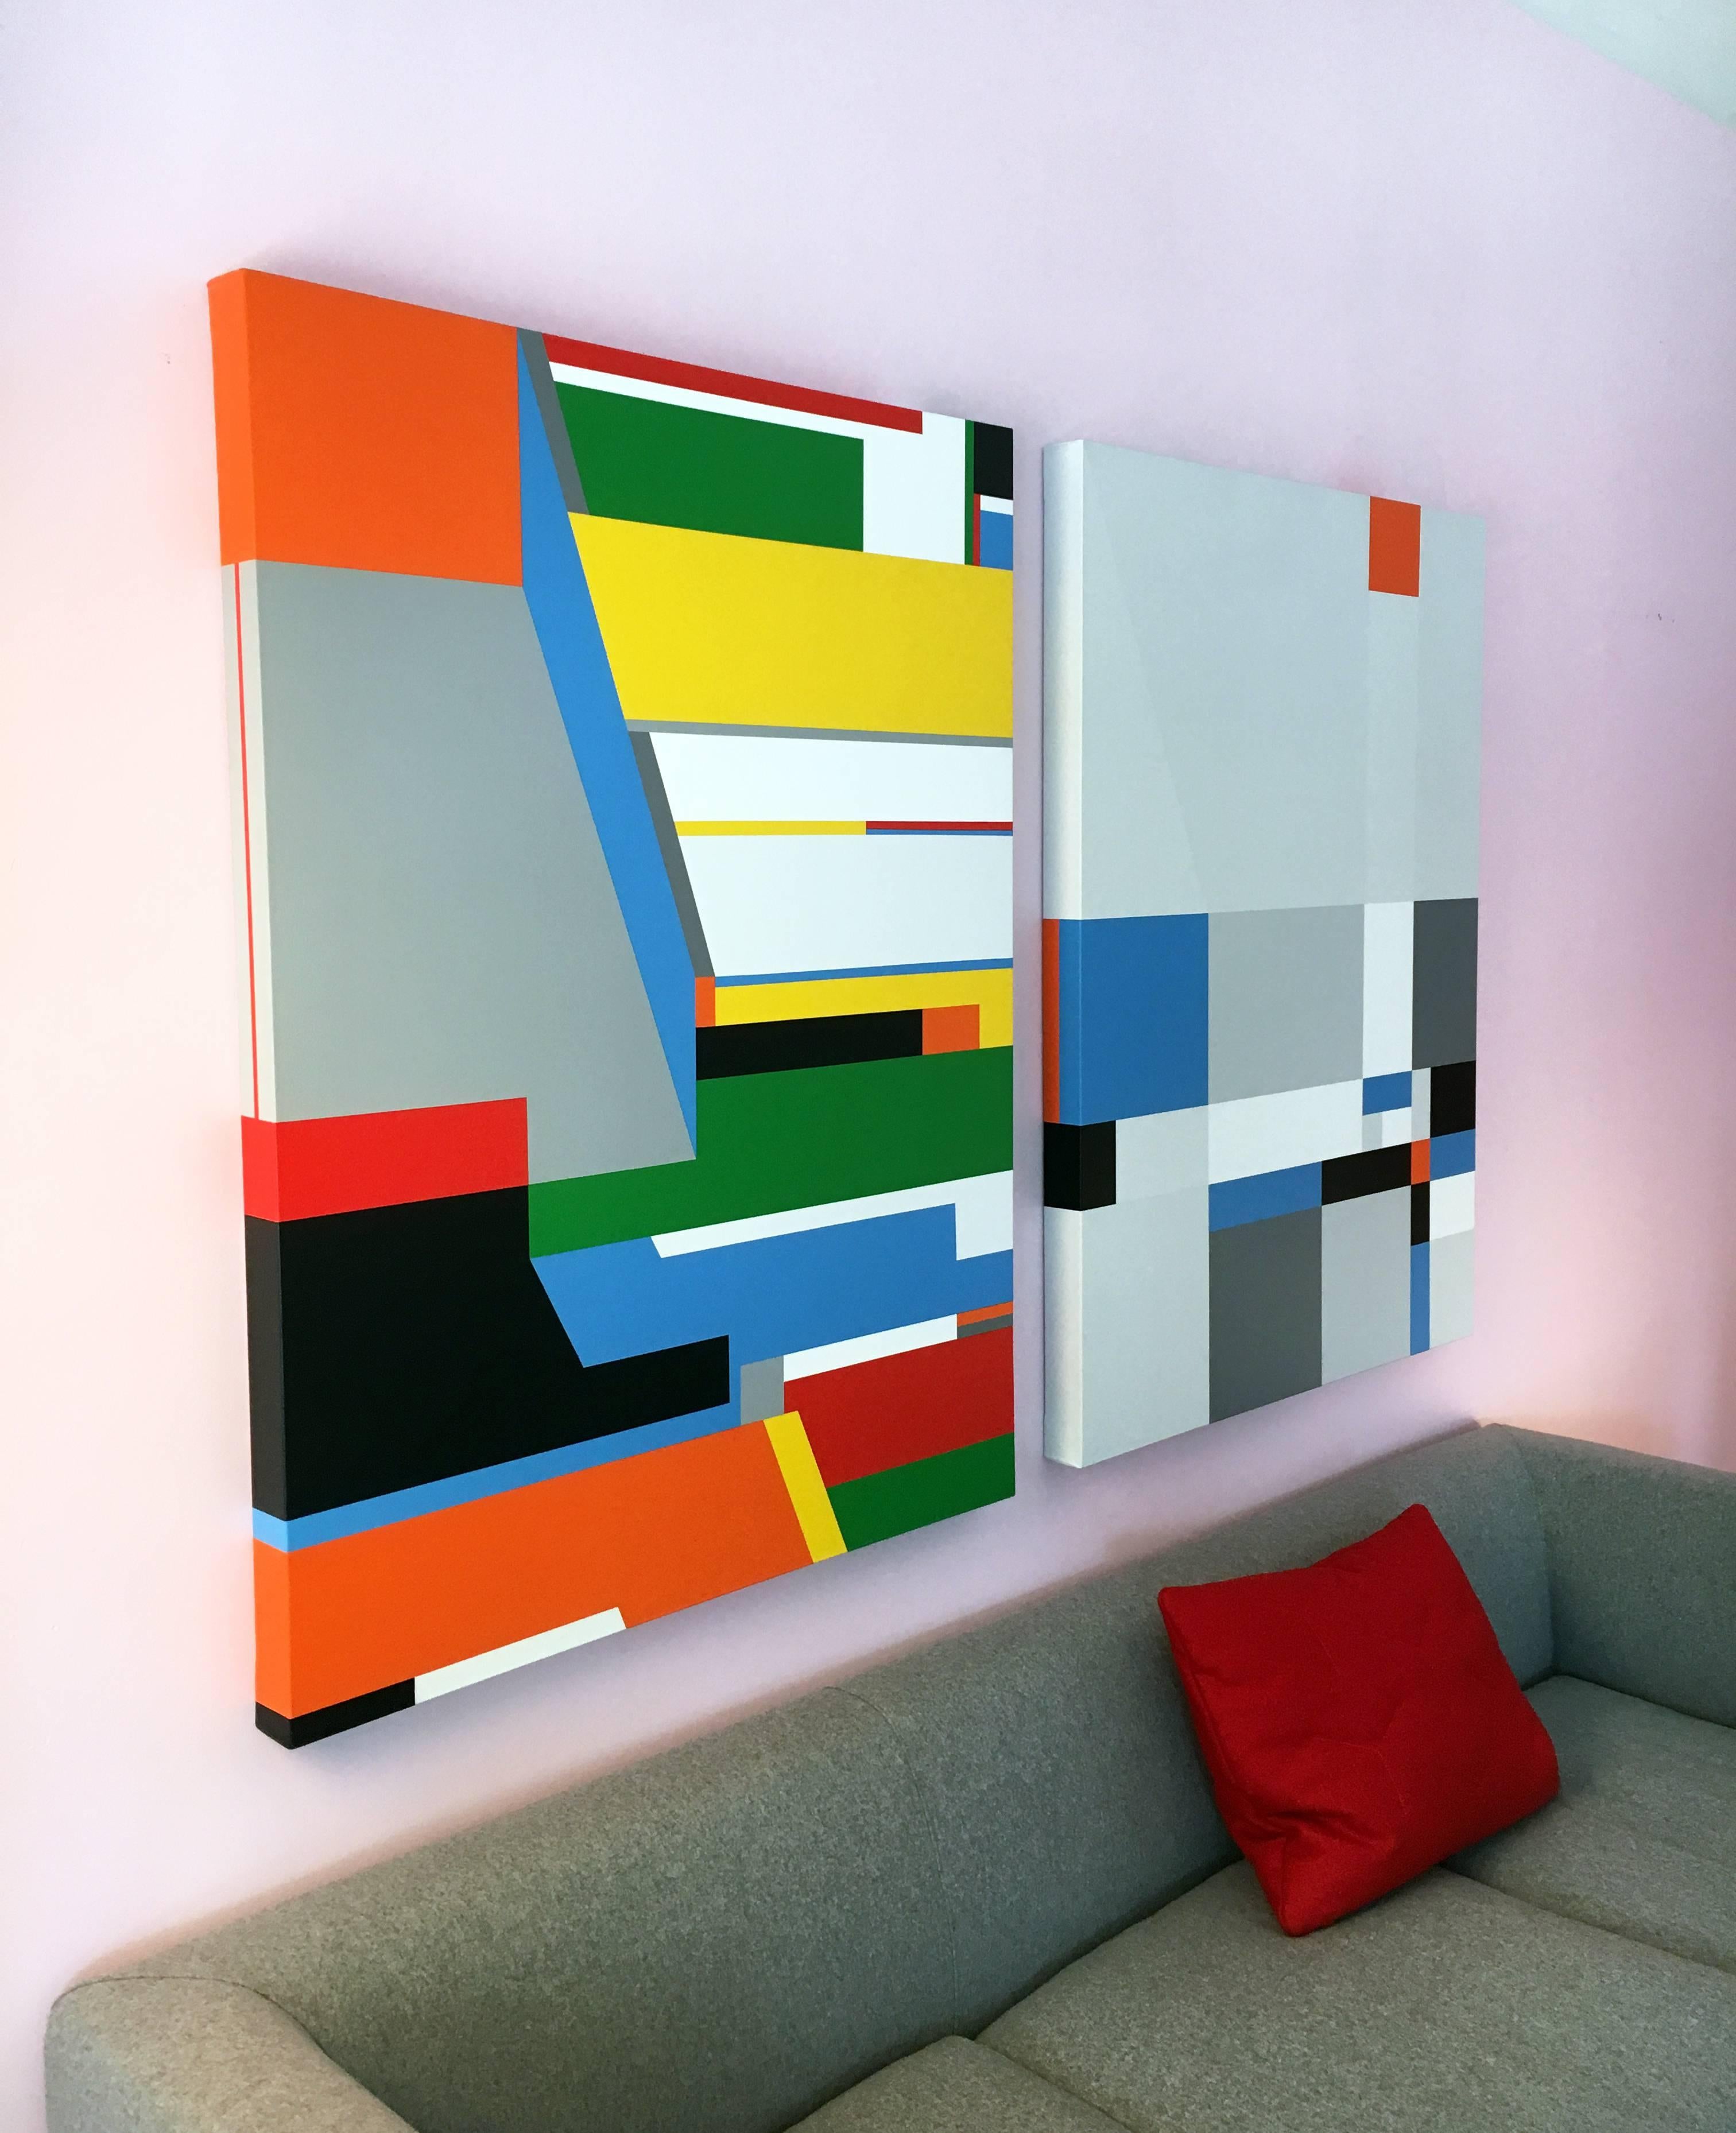 Bryce Hudson’s paintings are as notable for their nuance and sophistication as they are for their compositional drama. His geometric oil and acrylic on canvas paintings can be described as having a certain movement and three-dimensionality while